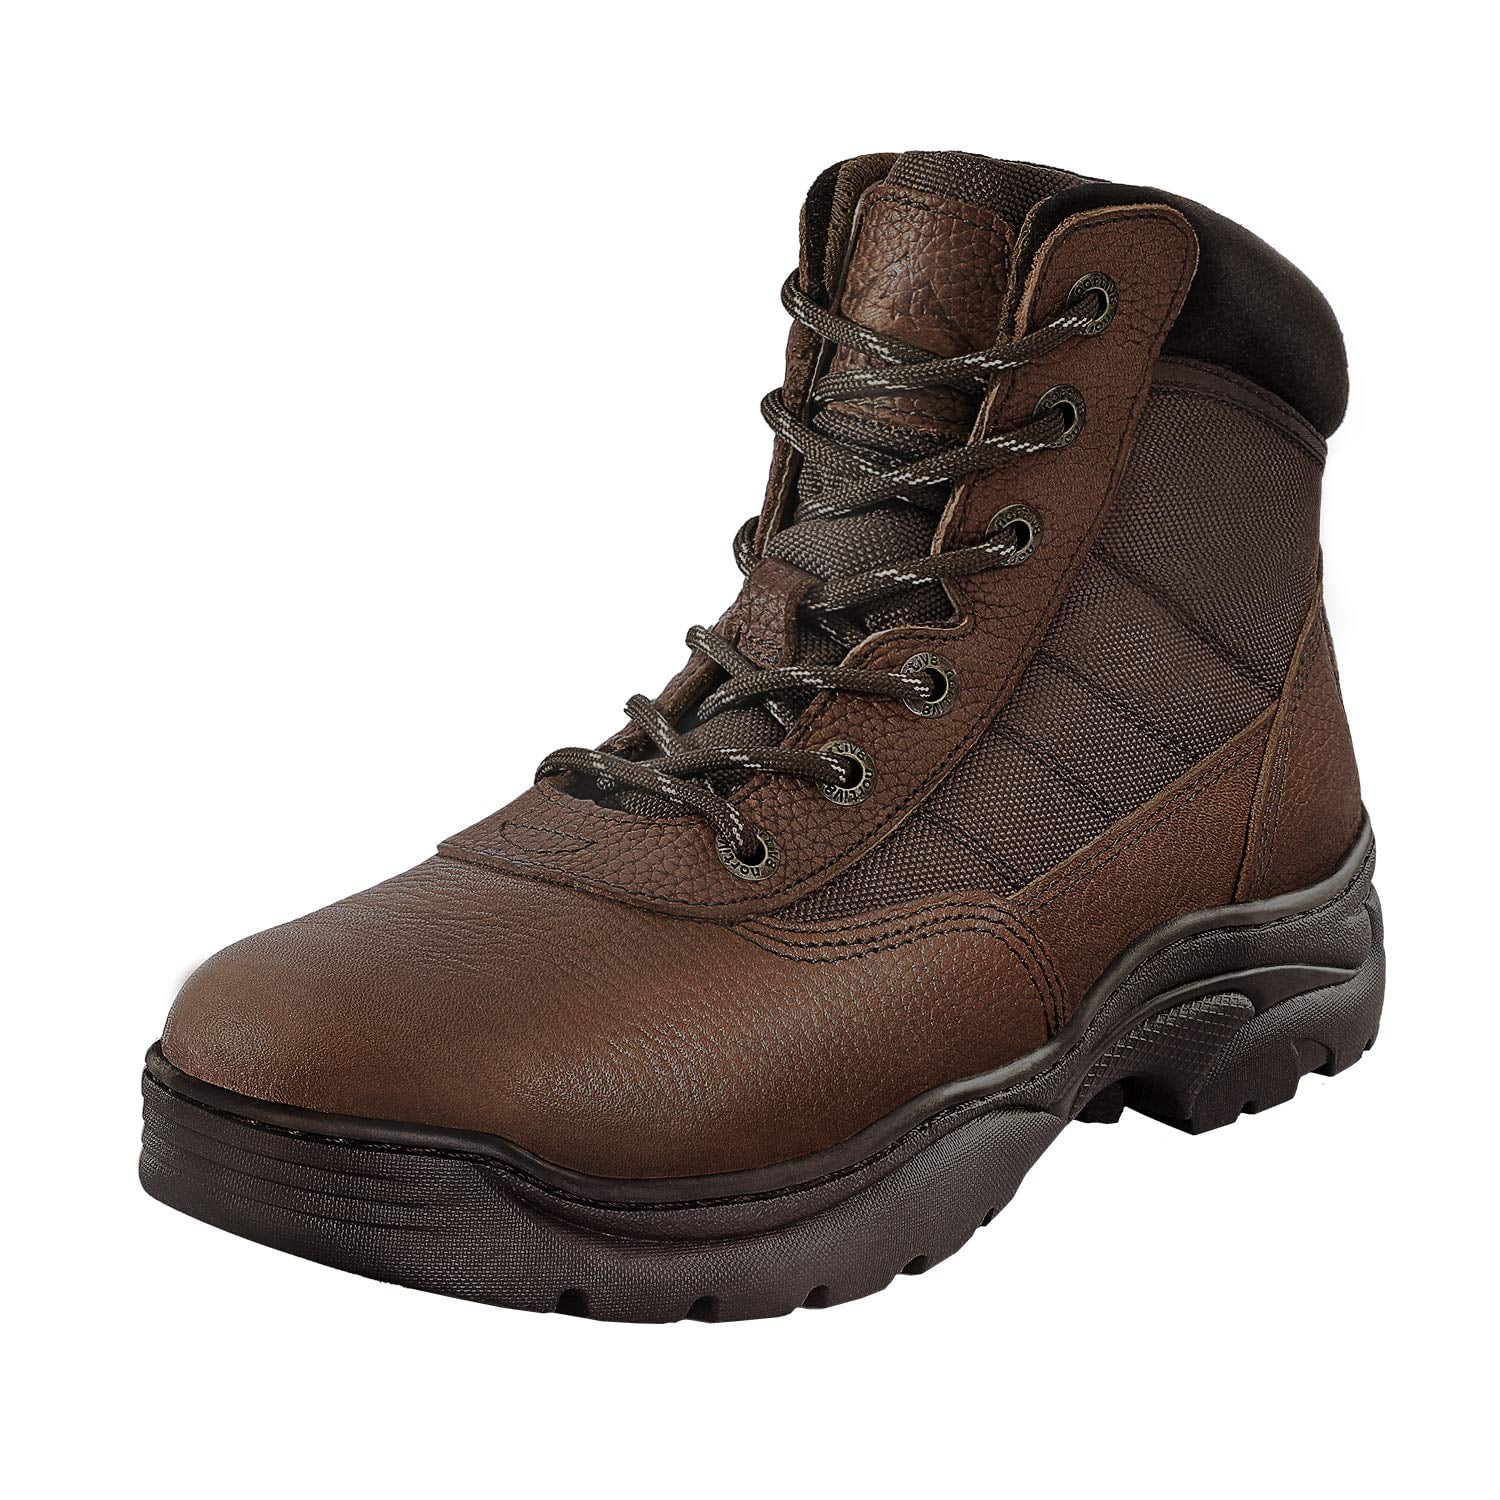 NORTIV 8 Men's Steel Toe Work Boots Safety  Construction Combat Work Shoes Size 